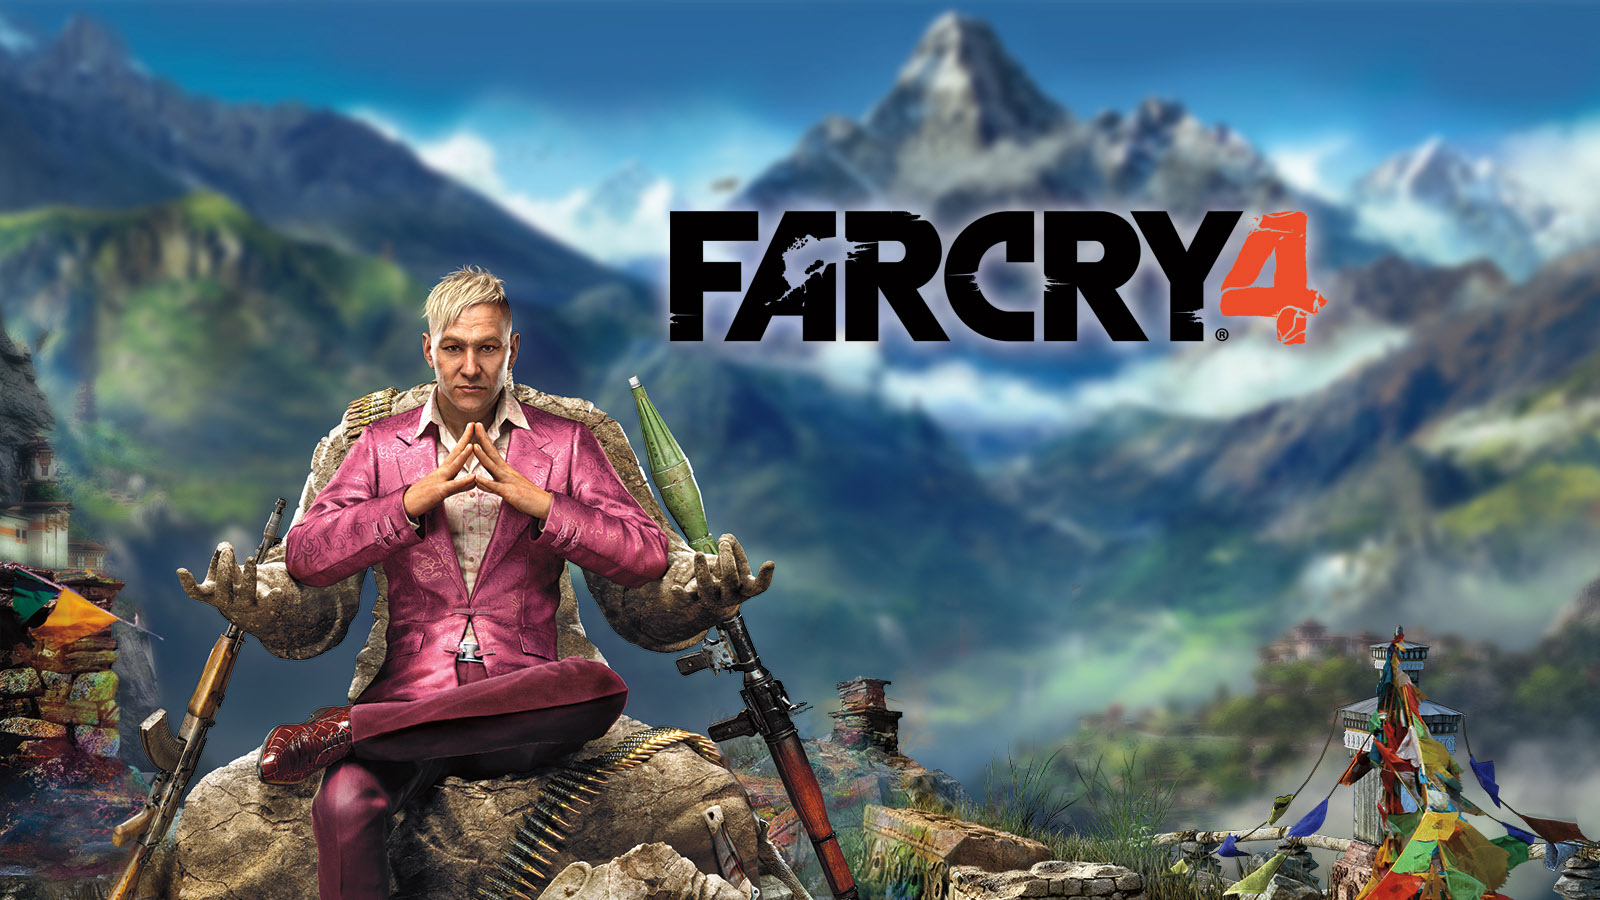 farcry4_banner